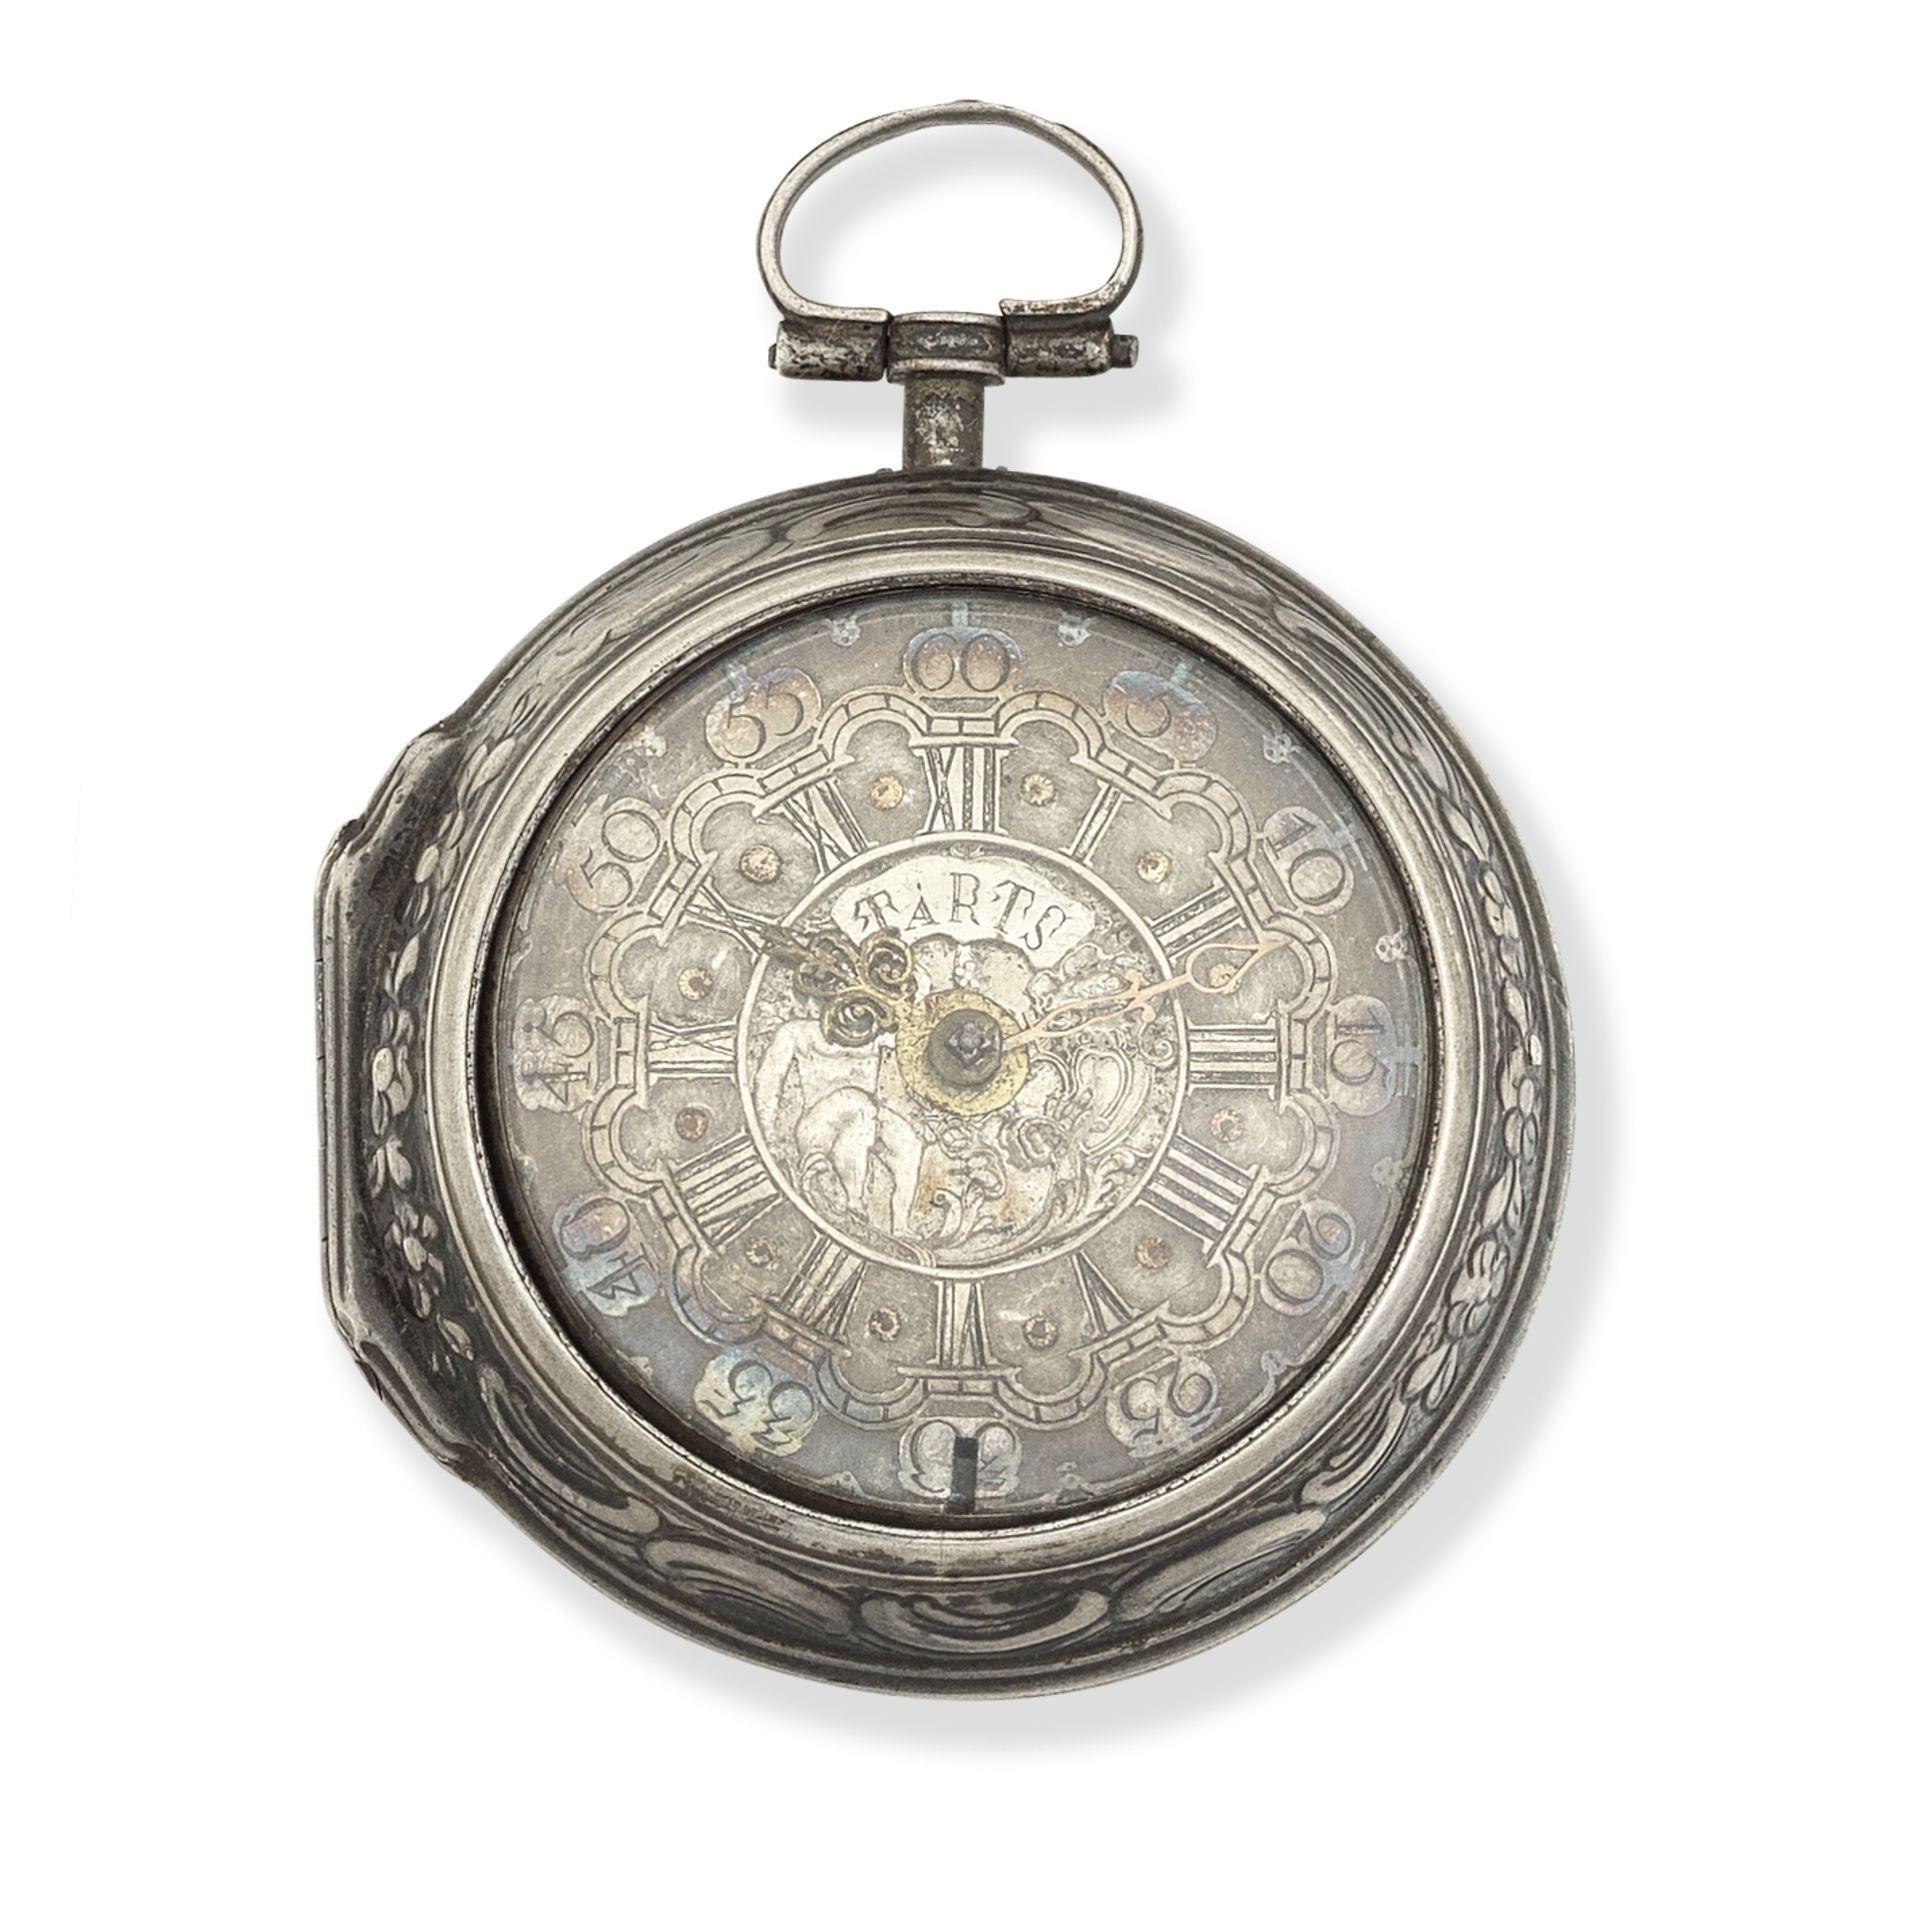 Tarts, London. A silver key wind pair case pocket watch with repouss&#233; decoration Circa 1774